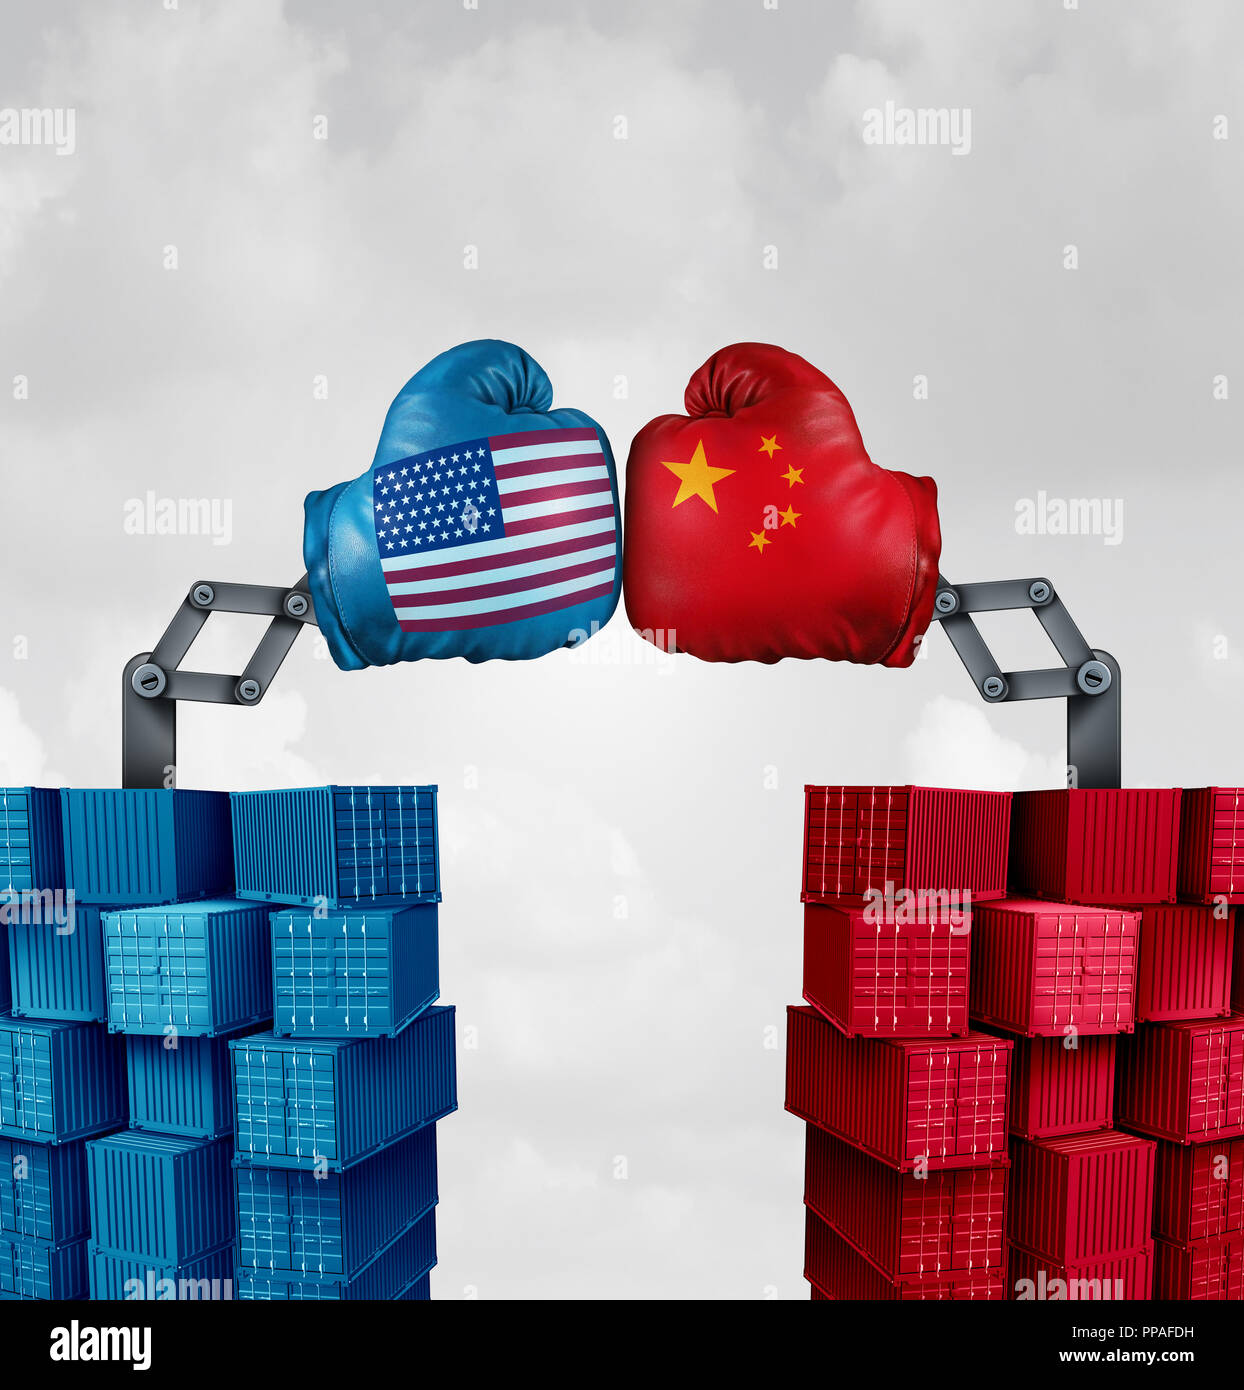 Trade war US China or American tariffs fight as two opposing cargo groups fighting as an economic  punitive taxation dispute over import and exports. Stock Photo